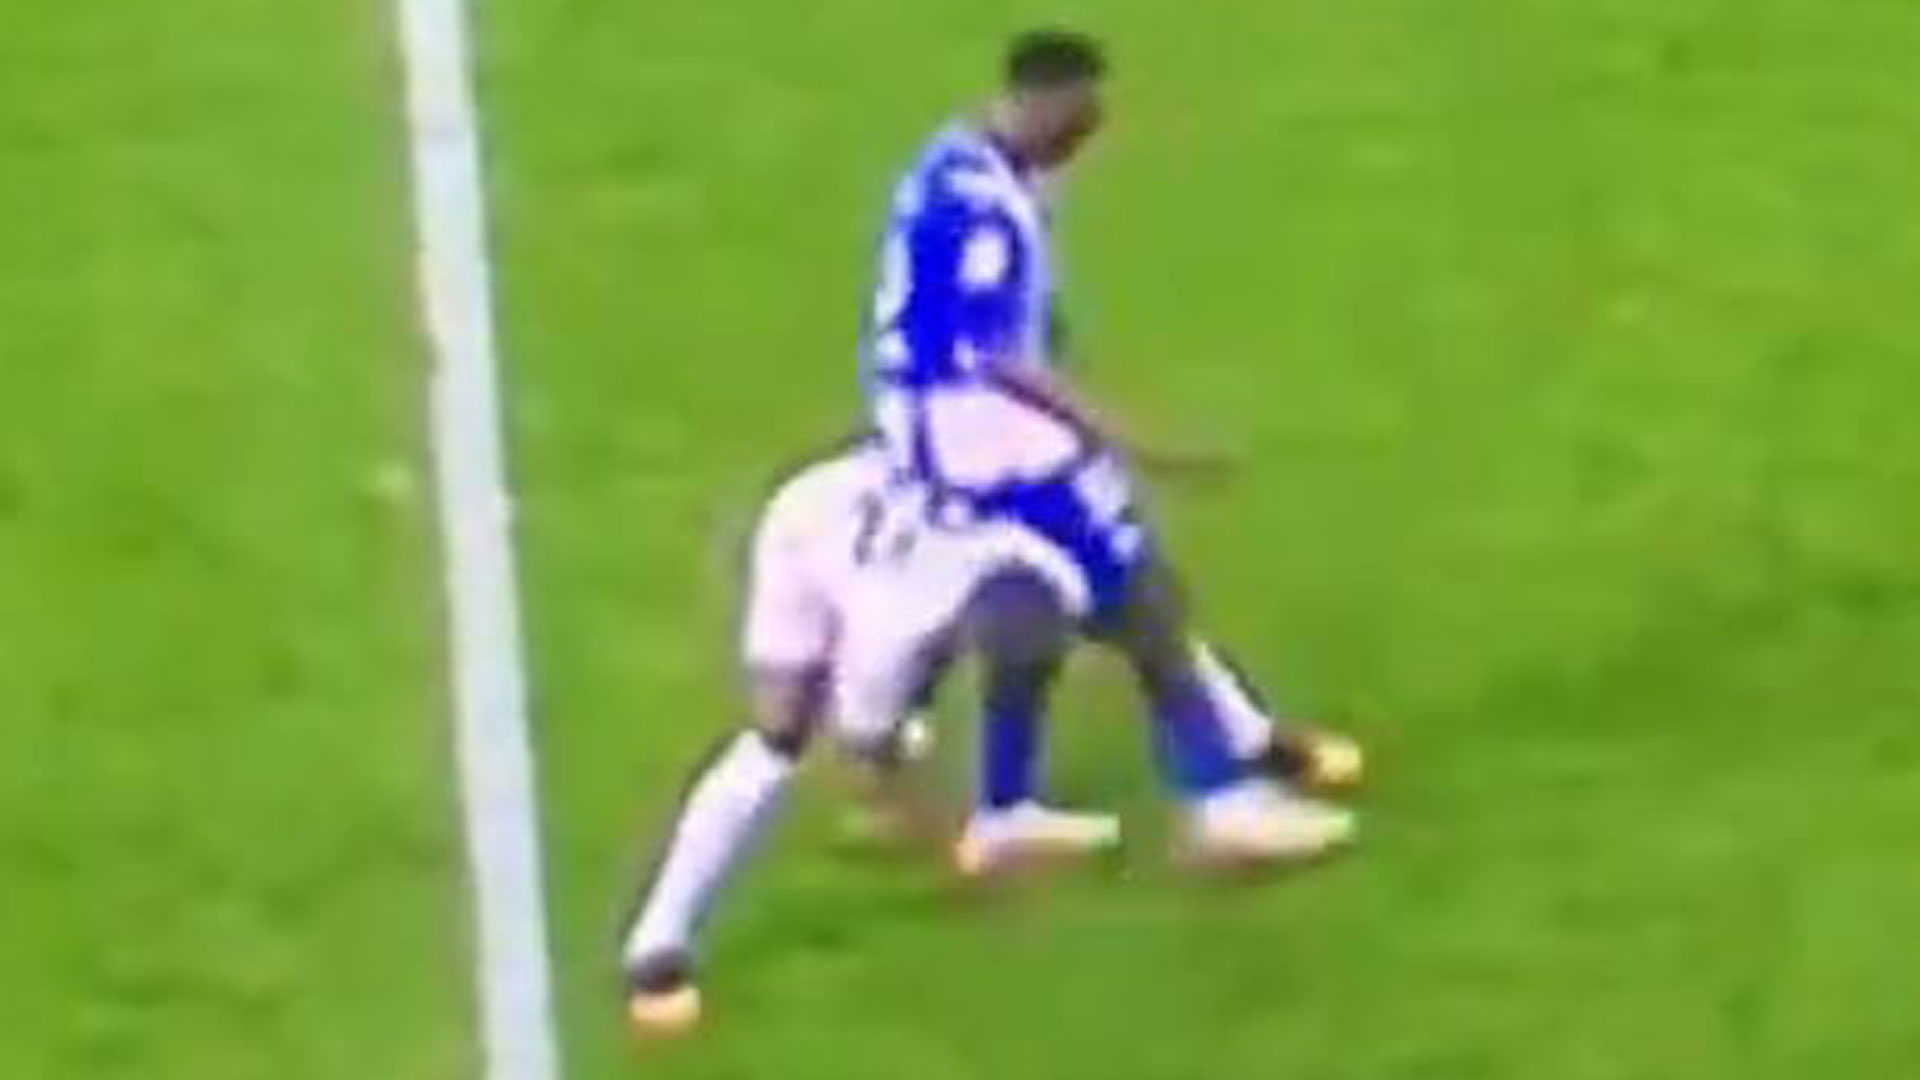 Fans convinced Antonio Rudiger is 'unhinged' as they spot former Chelsea defender's bizarre antics for Real Madrid